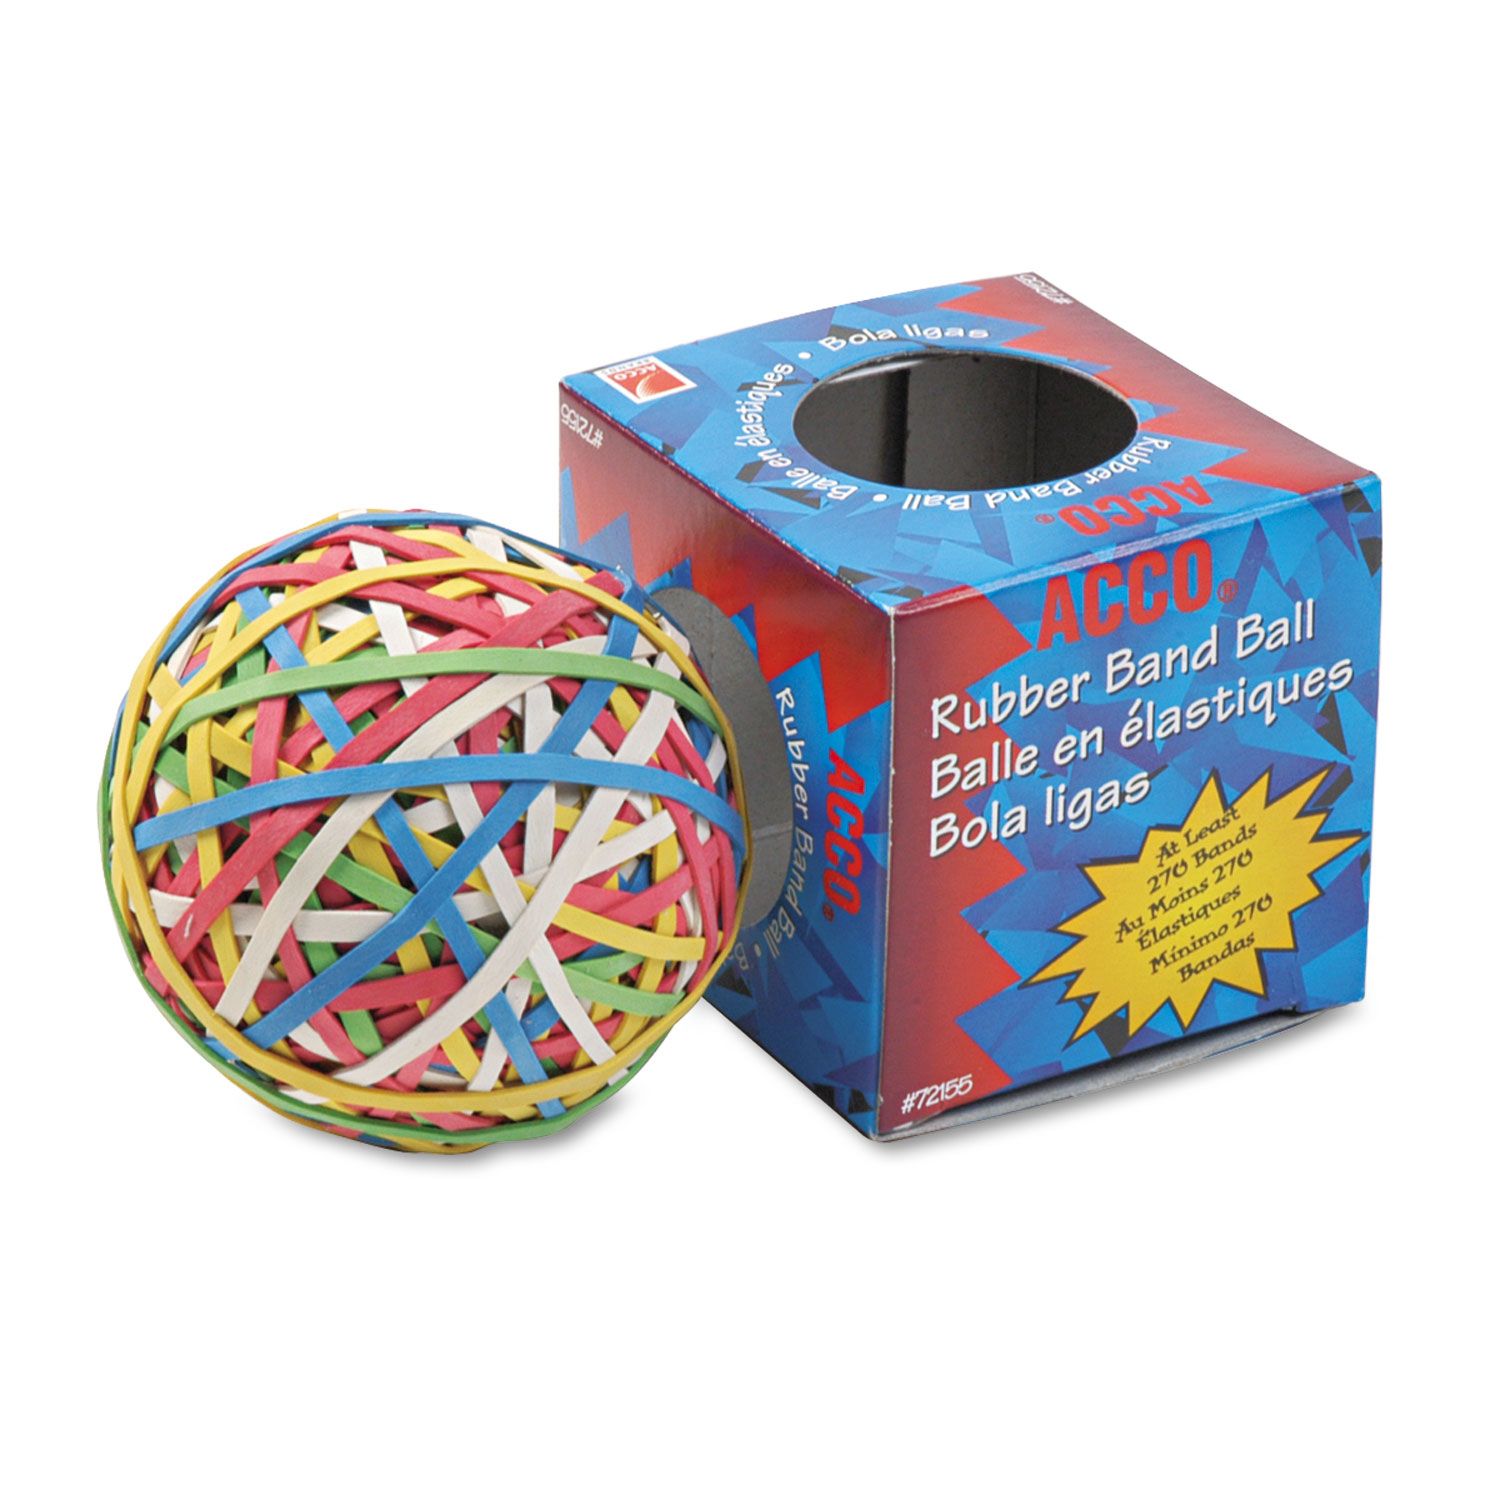 Rubber Band Ball, Approximately 275 Rubber Bands, Assorted